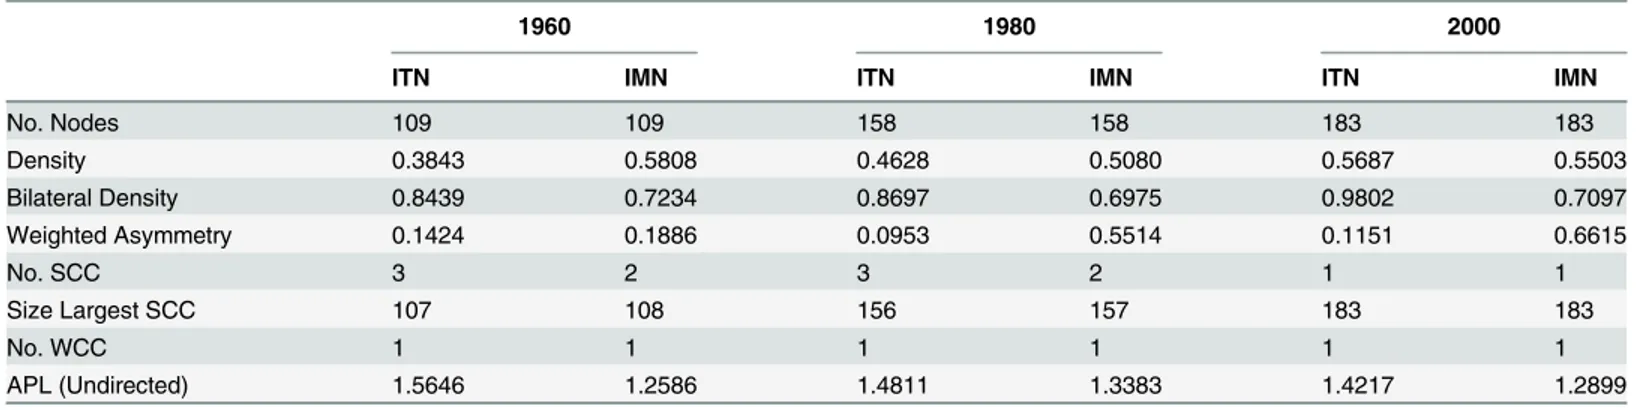 Table 1. IMN vs. ITN: Descriptive Network Statistics. Note: SCC: Strongly connected components